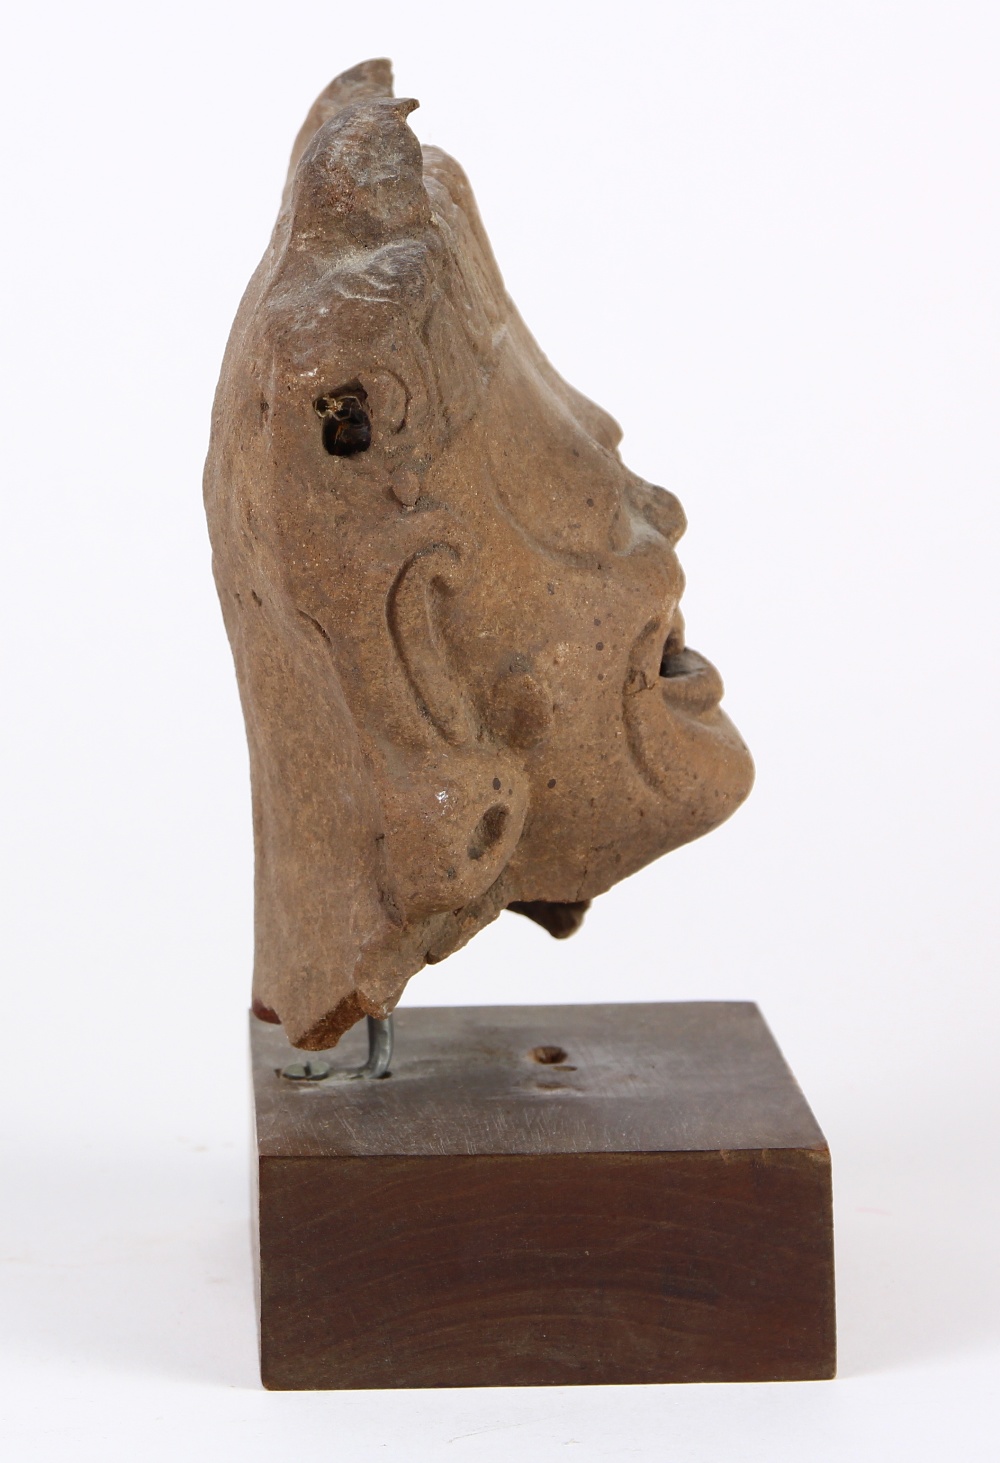 Pre-Columbian Veracruz ceramic head fragment of a lord or deity, the pronounced brow narrowing to an - Image 4 of 6